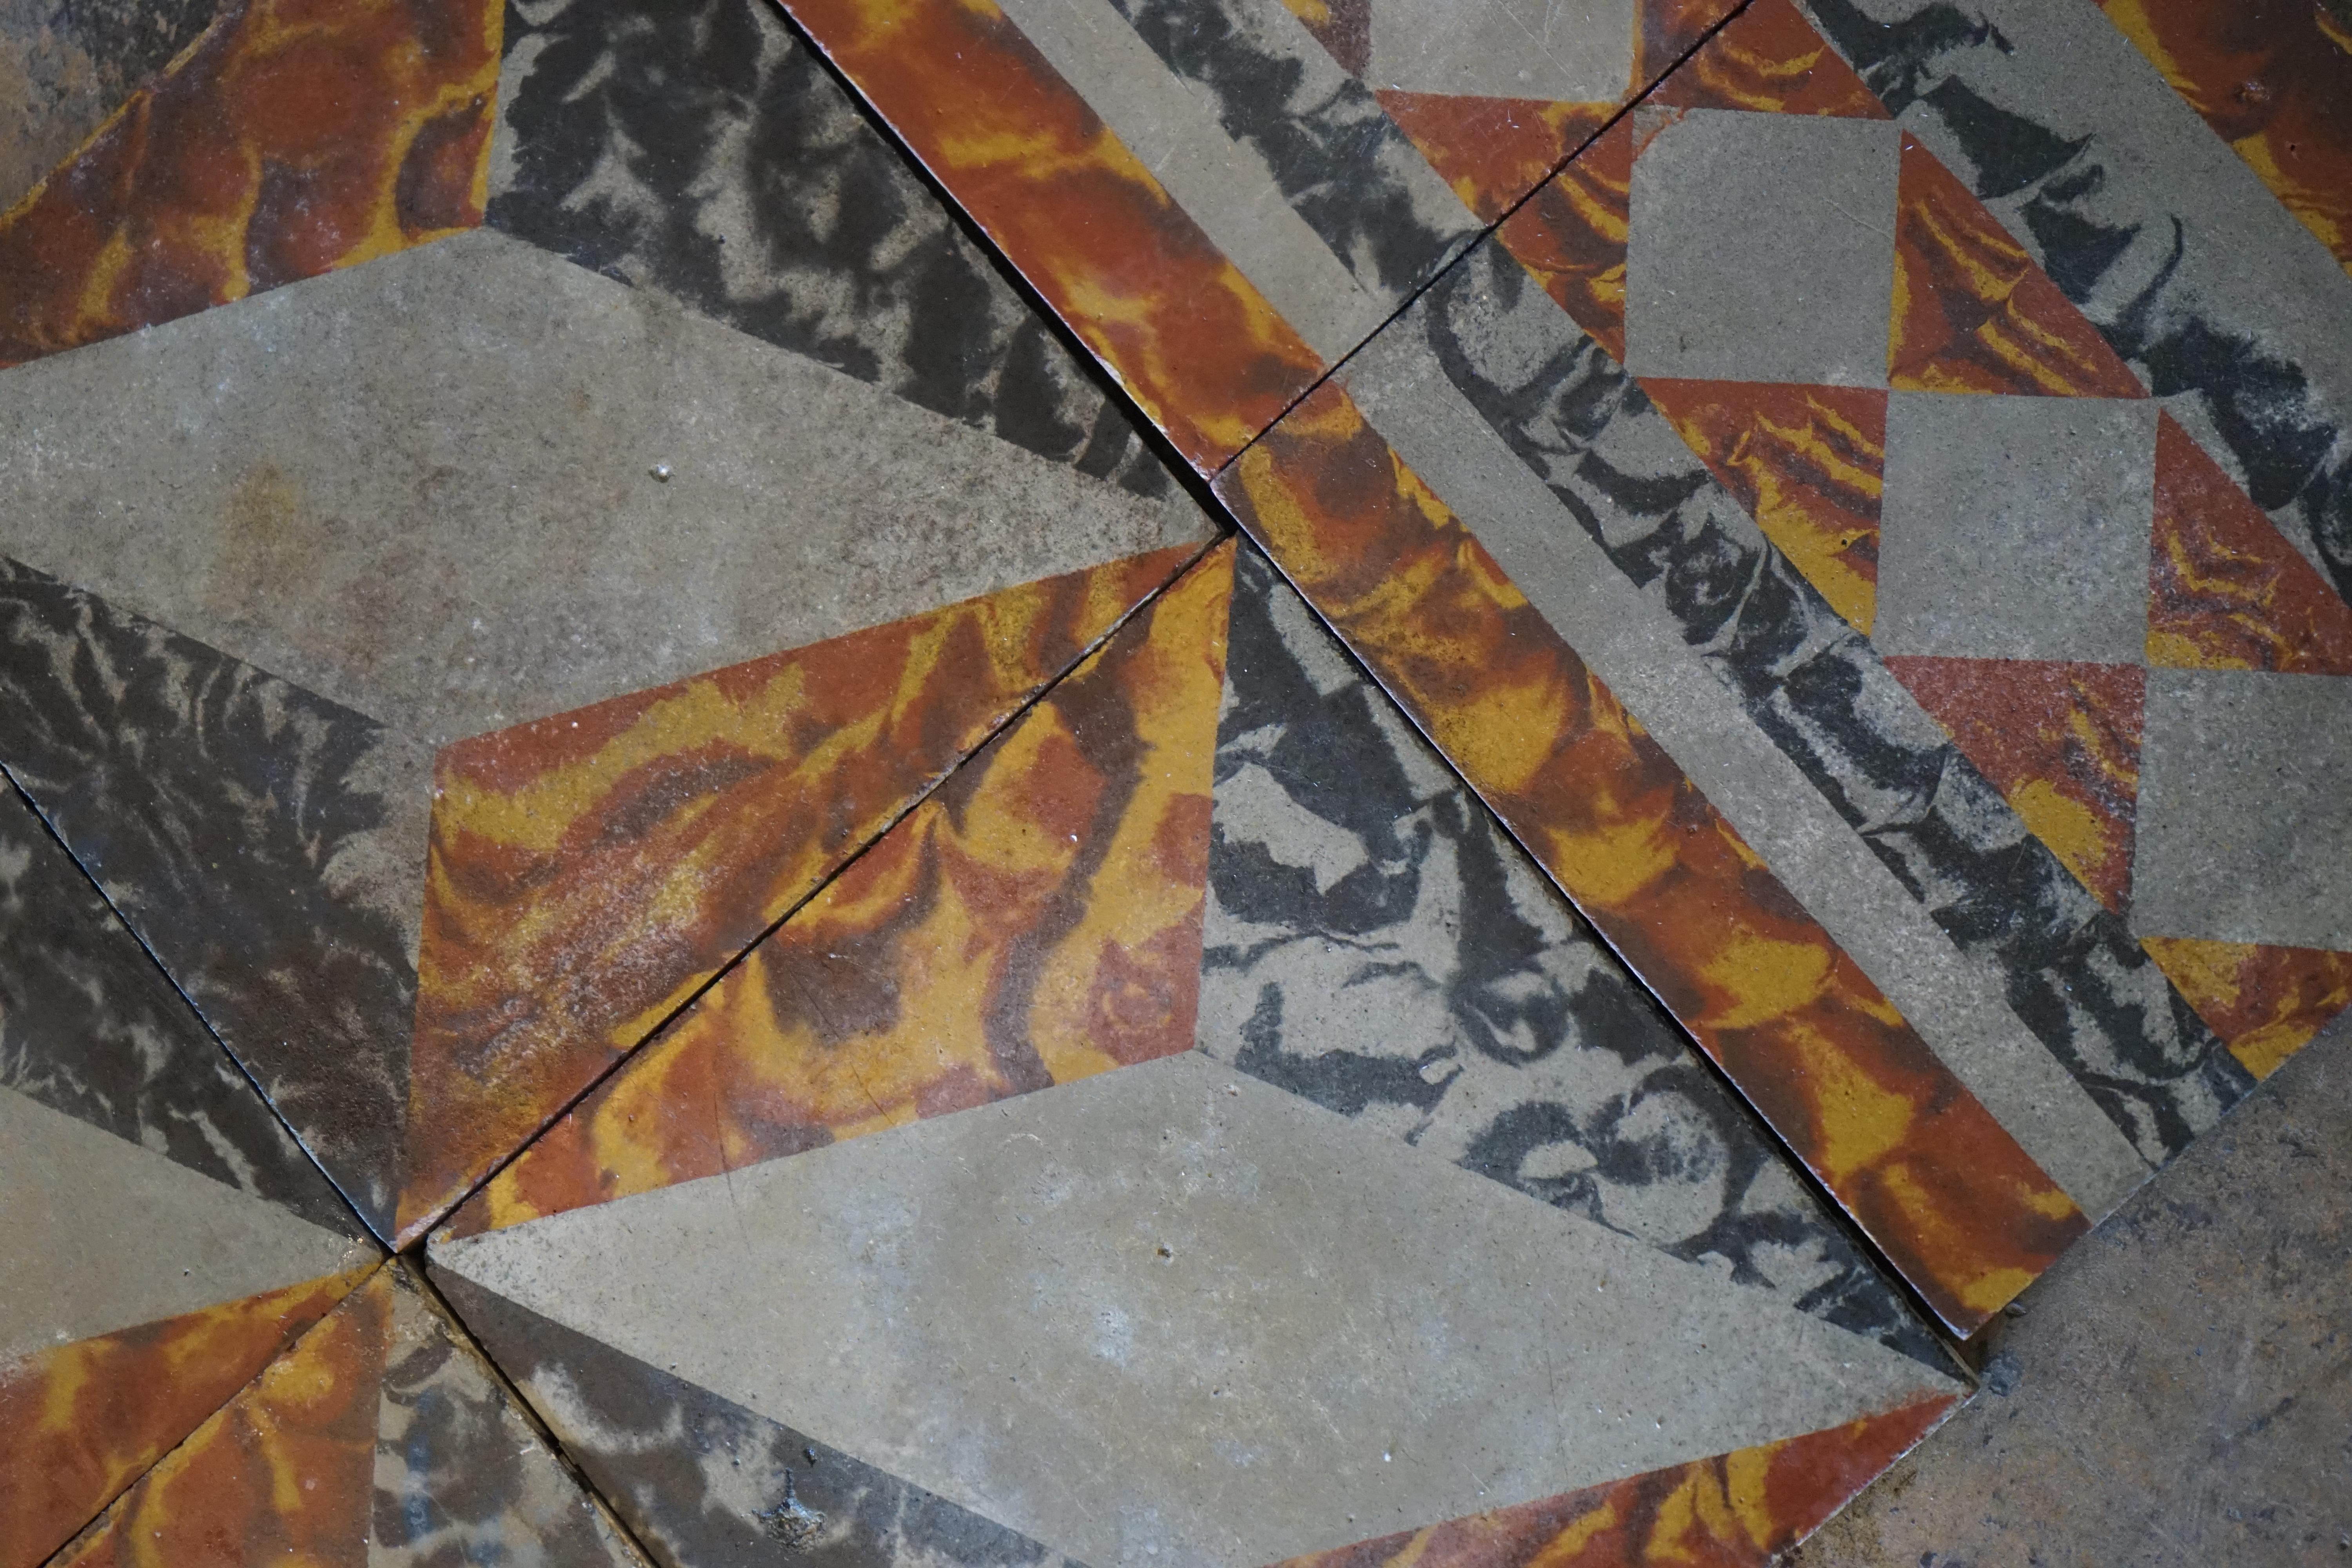 This lot of reclaimed tiling originates from France circa the 1920s. Features a vibrant patterned design of orange, yellow, and black painterly strokes on grey concrete. 

125 square feet with approximately 30 square feet of border tile.

Each tile